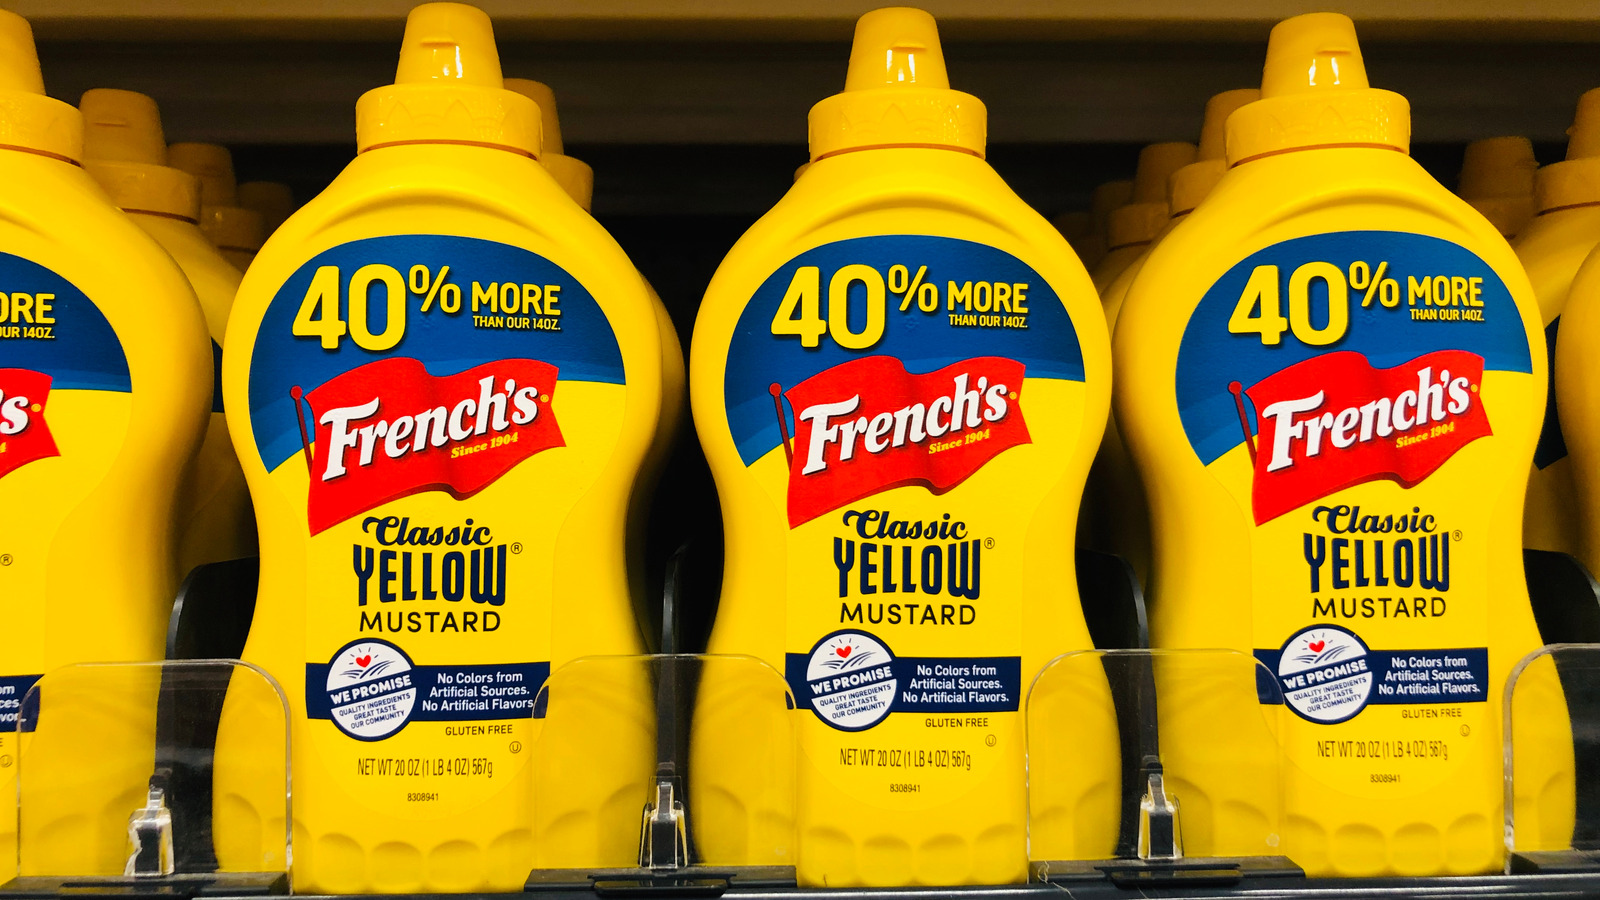 https://www.thedailymeal.com/img/gallery/the-frenchs-mustard-hack-you-didnt-even-know-about/l-intro-1667822940.jpg